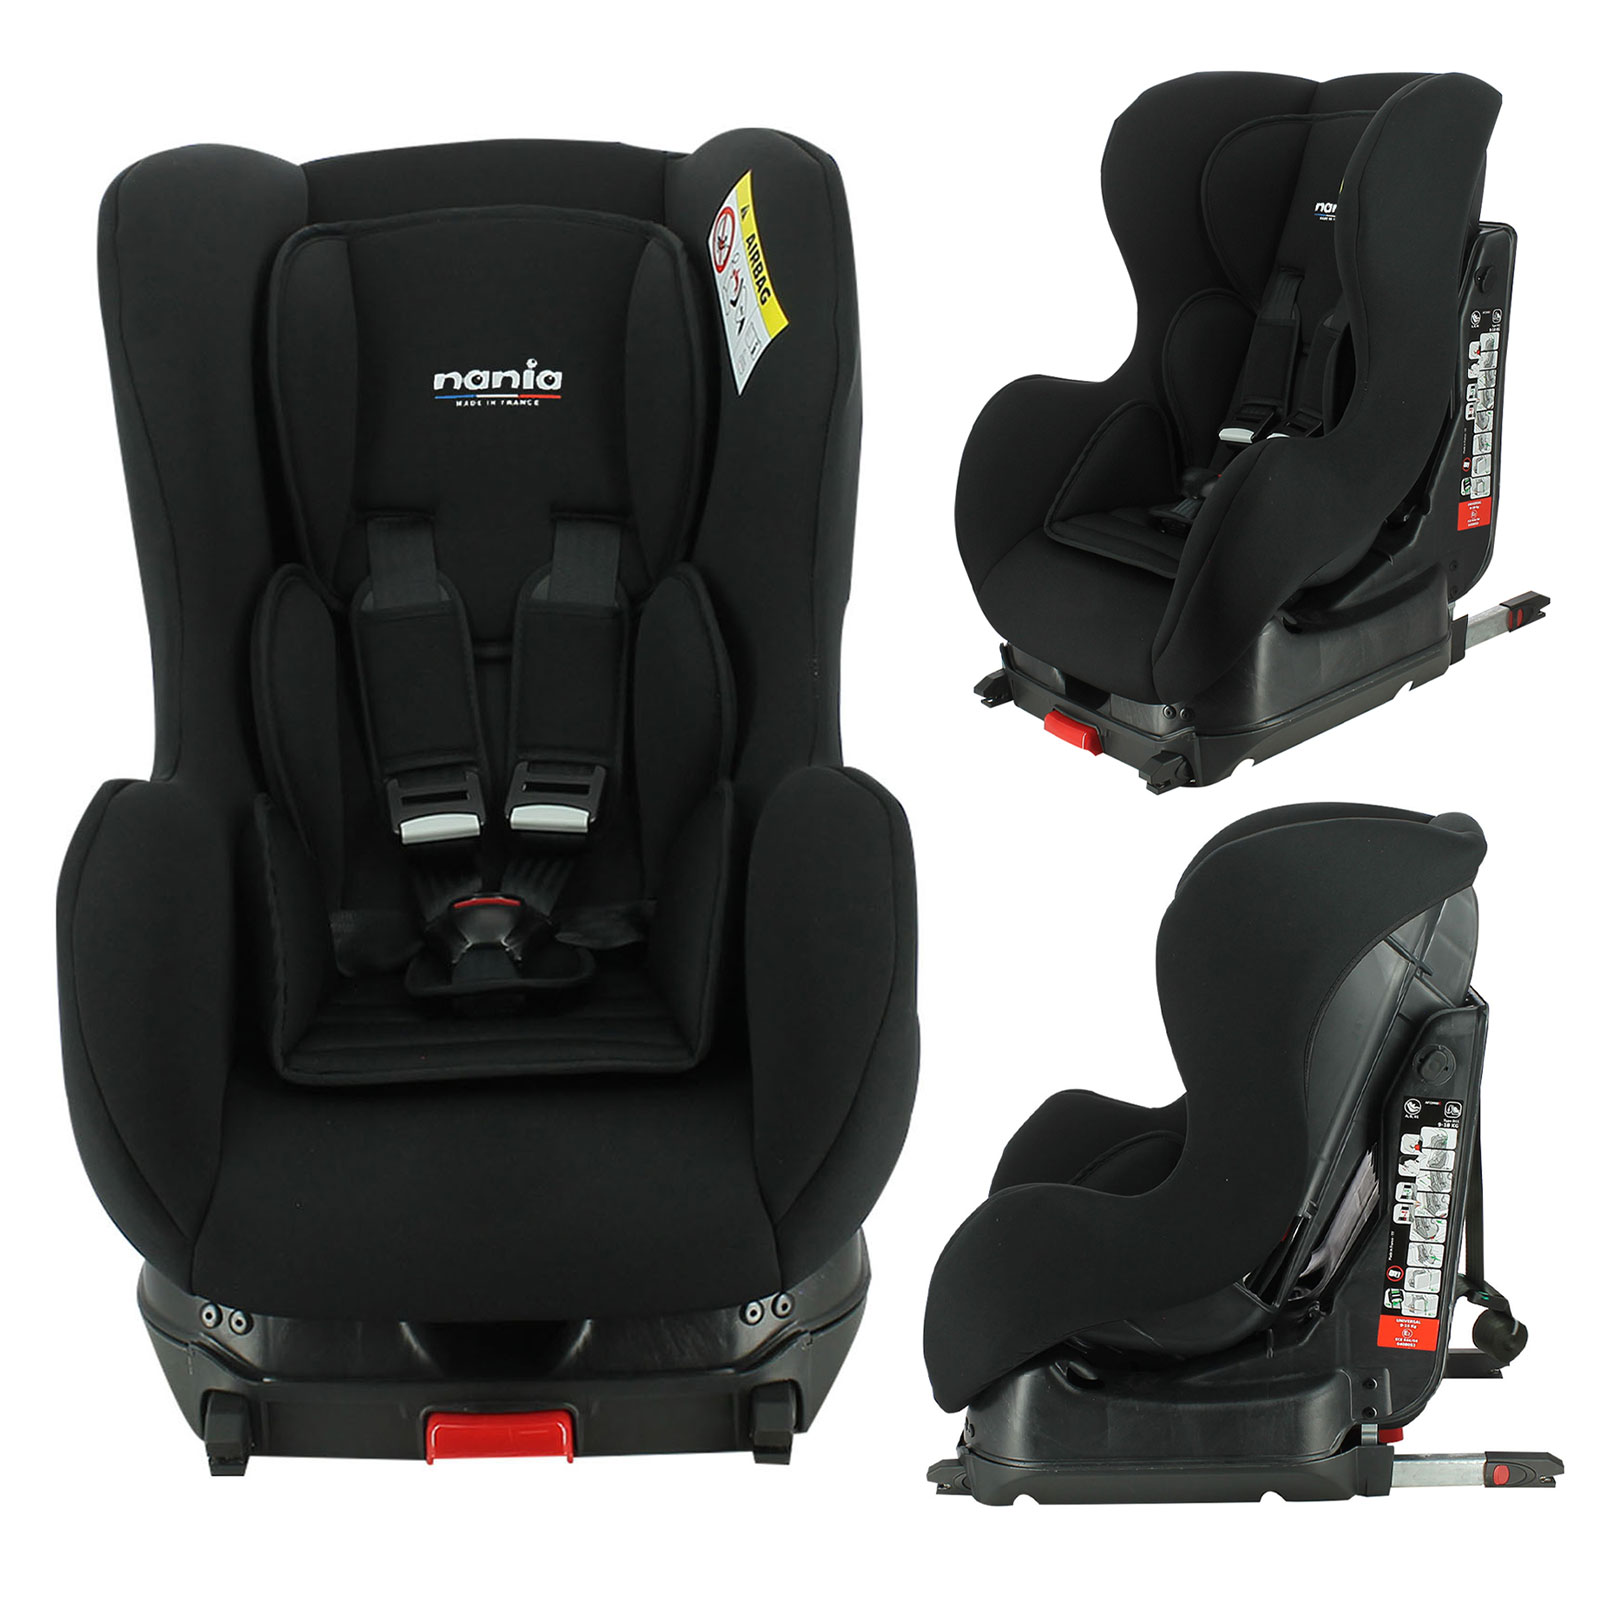 Nania Cosmo SP Group 0/1 ISOFIX Car Seat - Black (0-4 years)